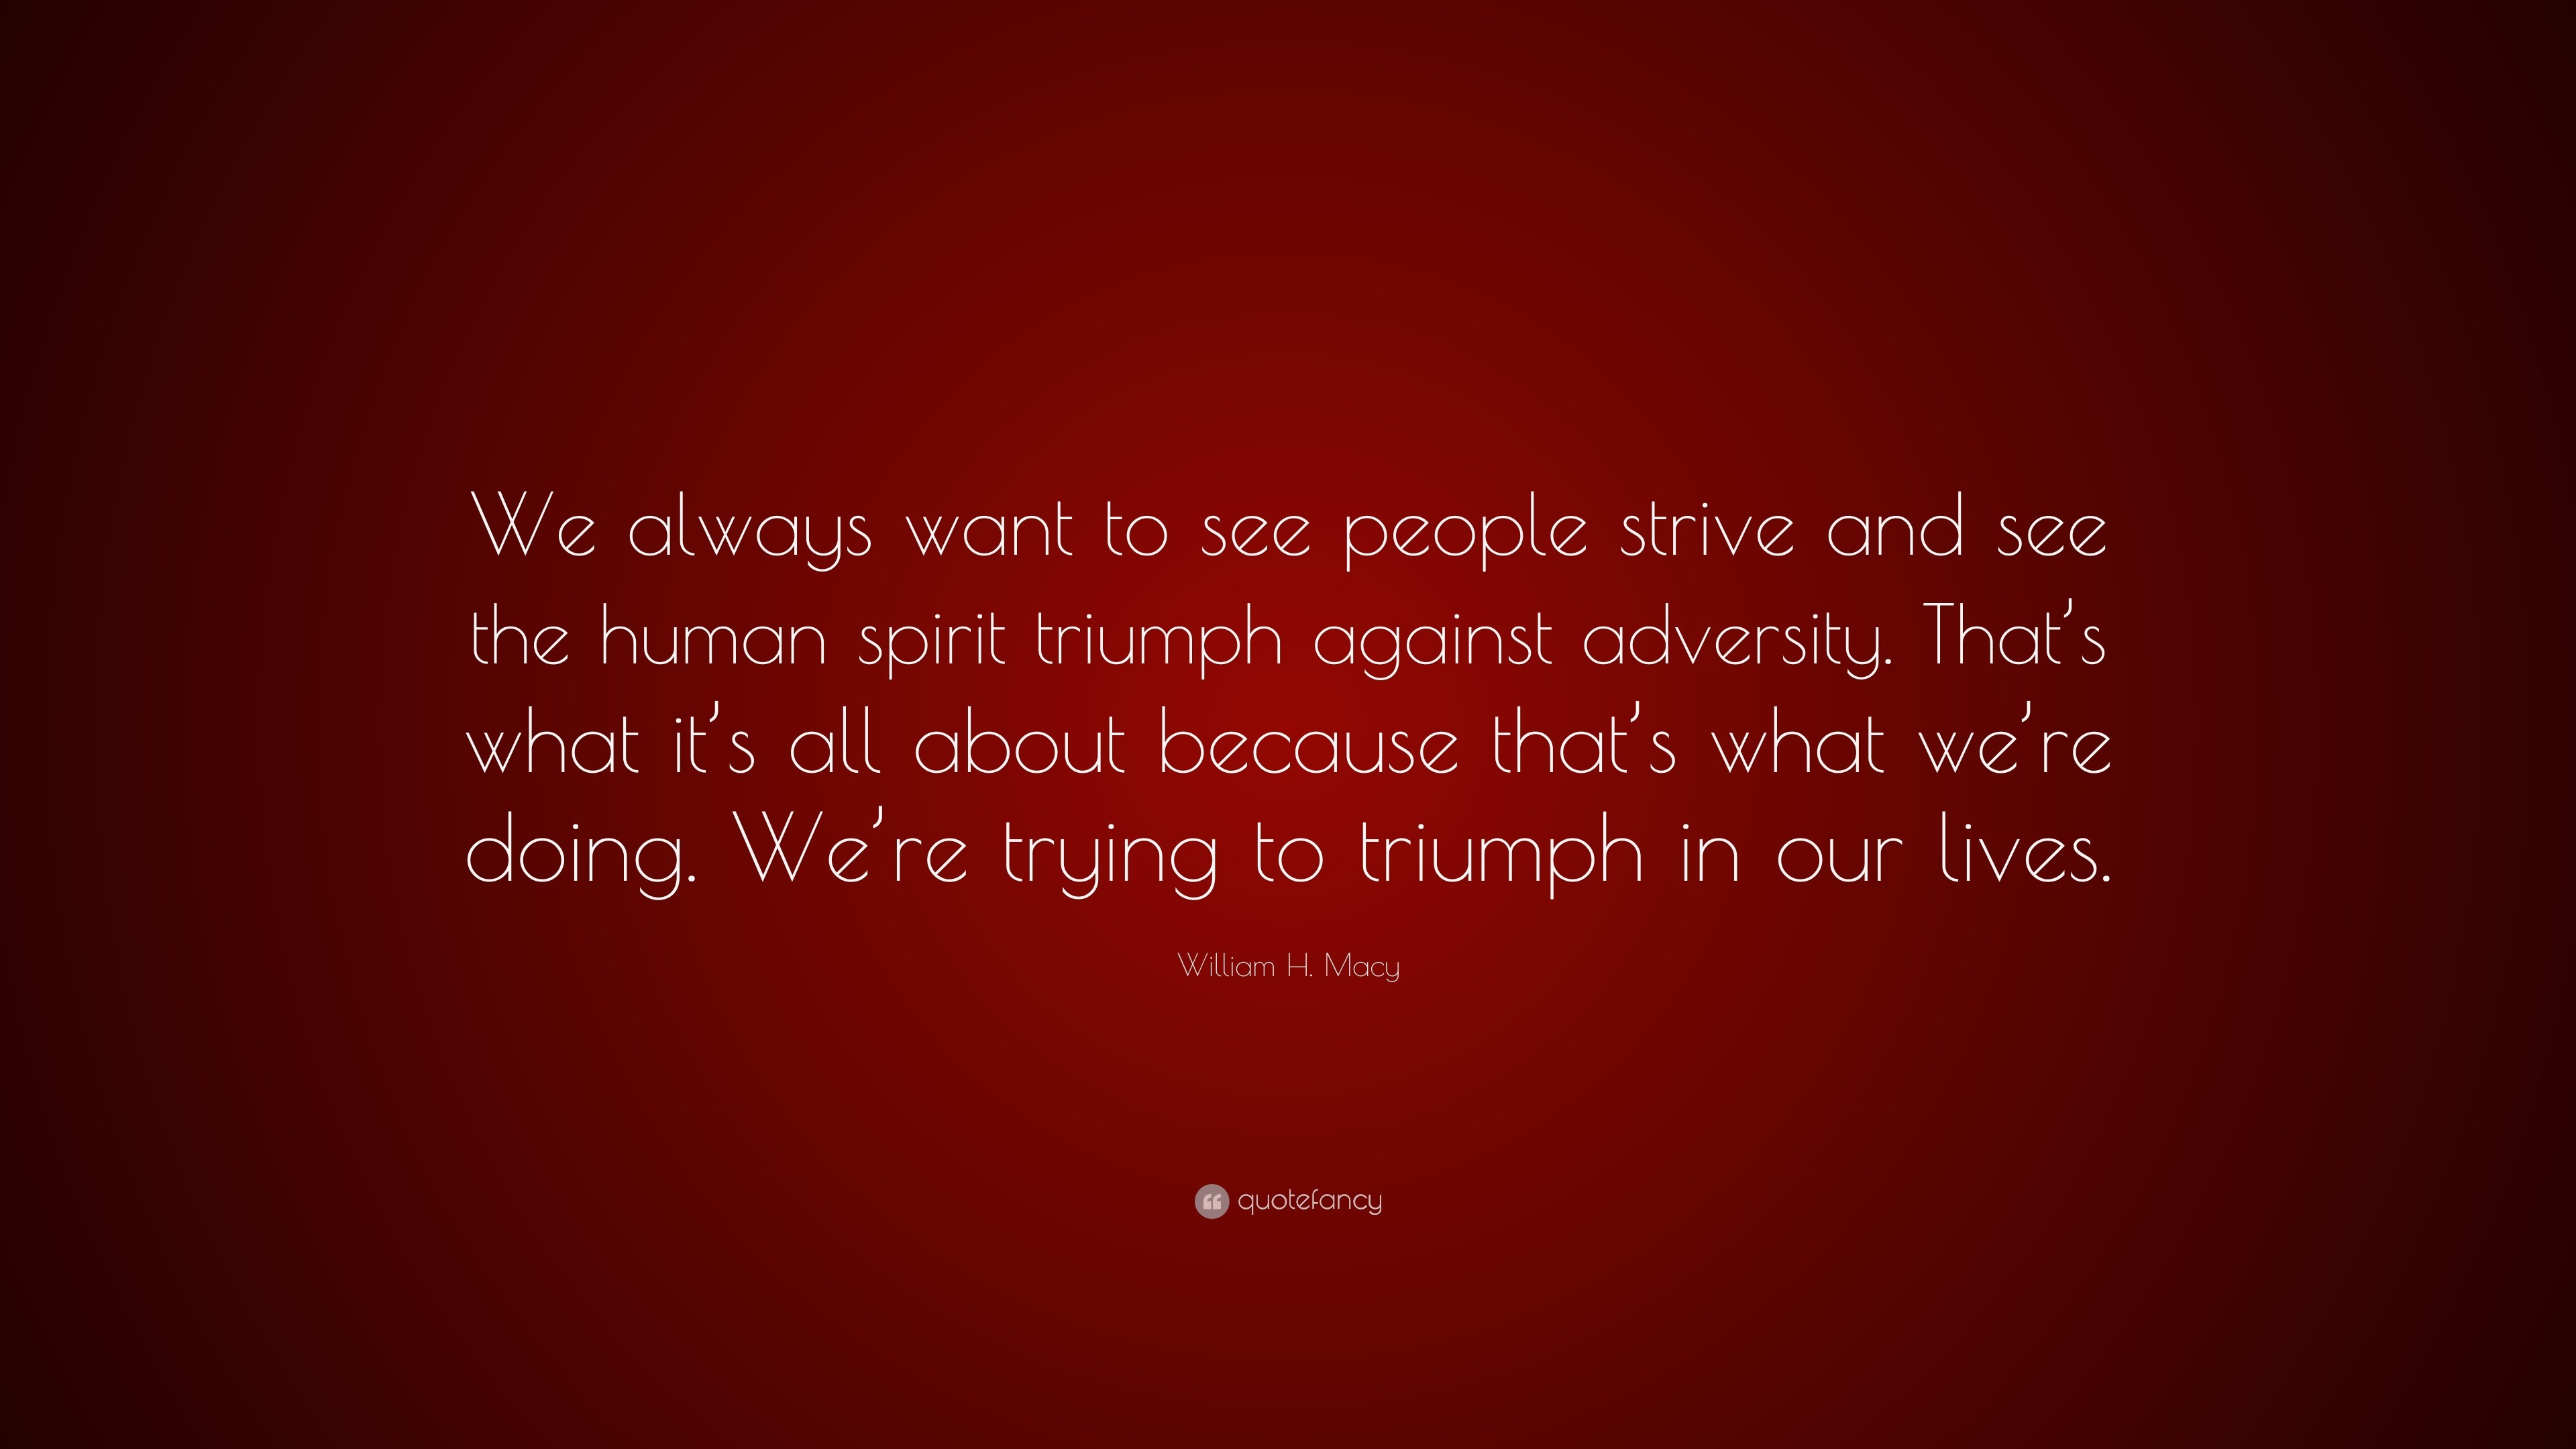 3840x2160 William H. Macy Quote: “We always want to see people strive and see